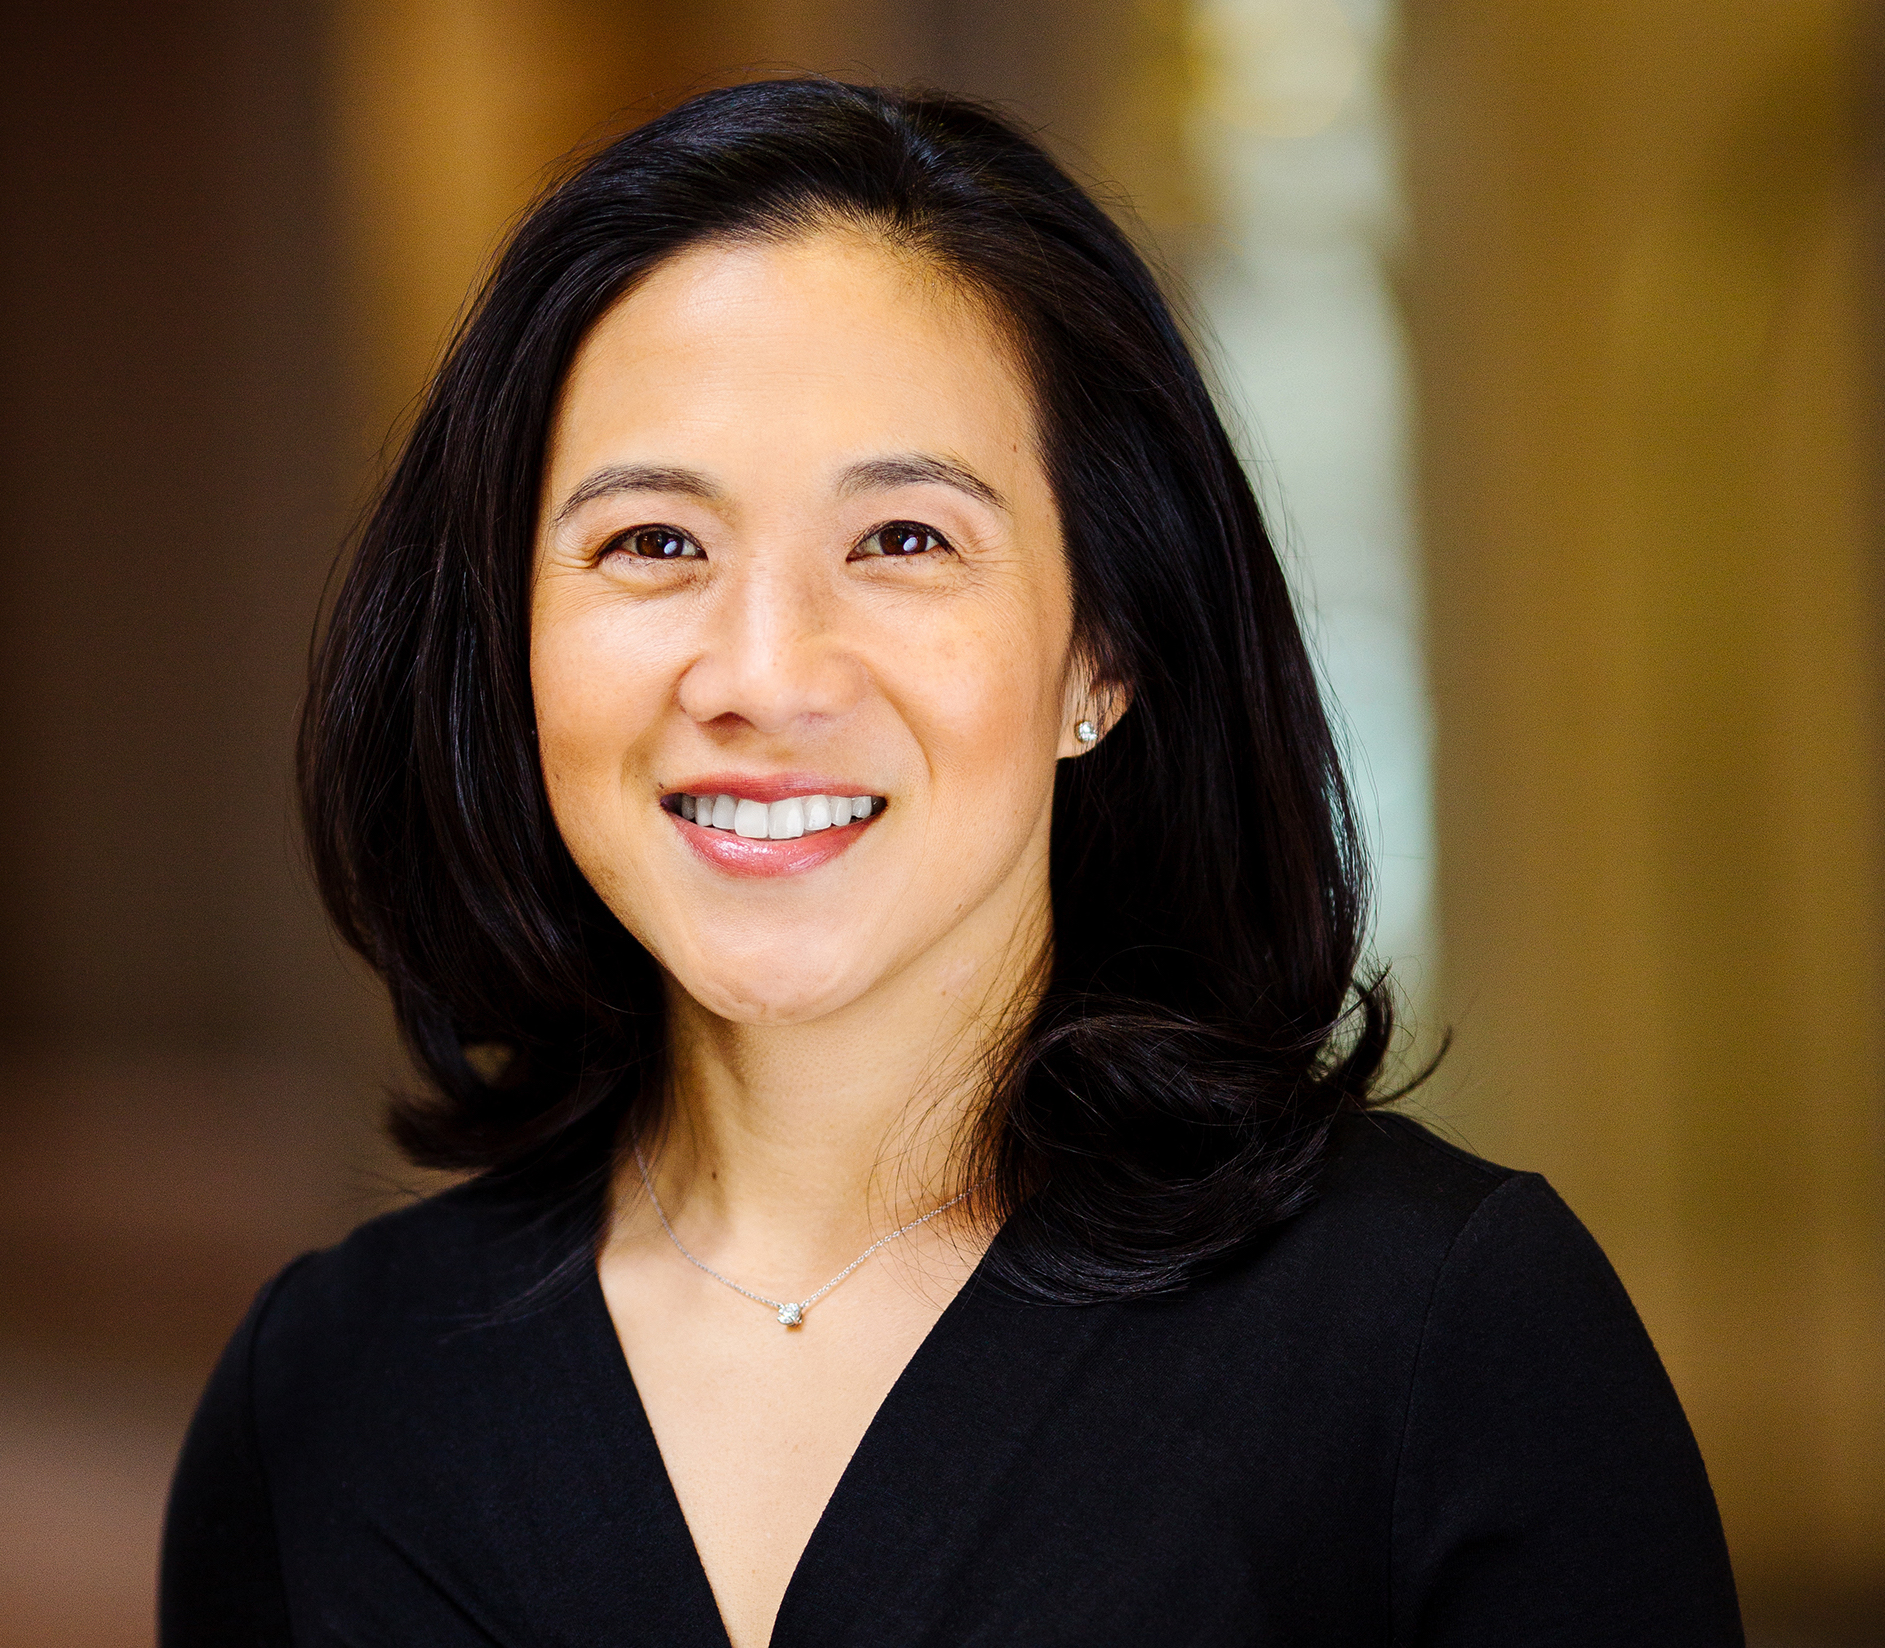 Positively Gritty: A Conversation with Dr. Angela Duckworth